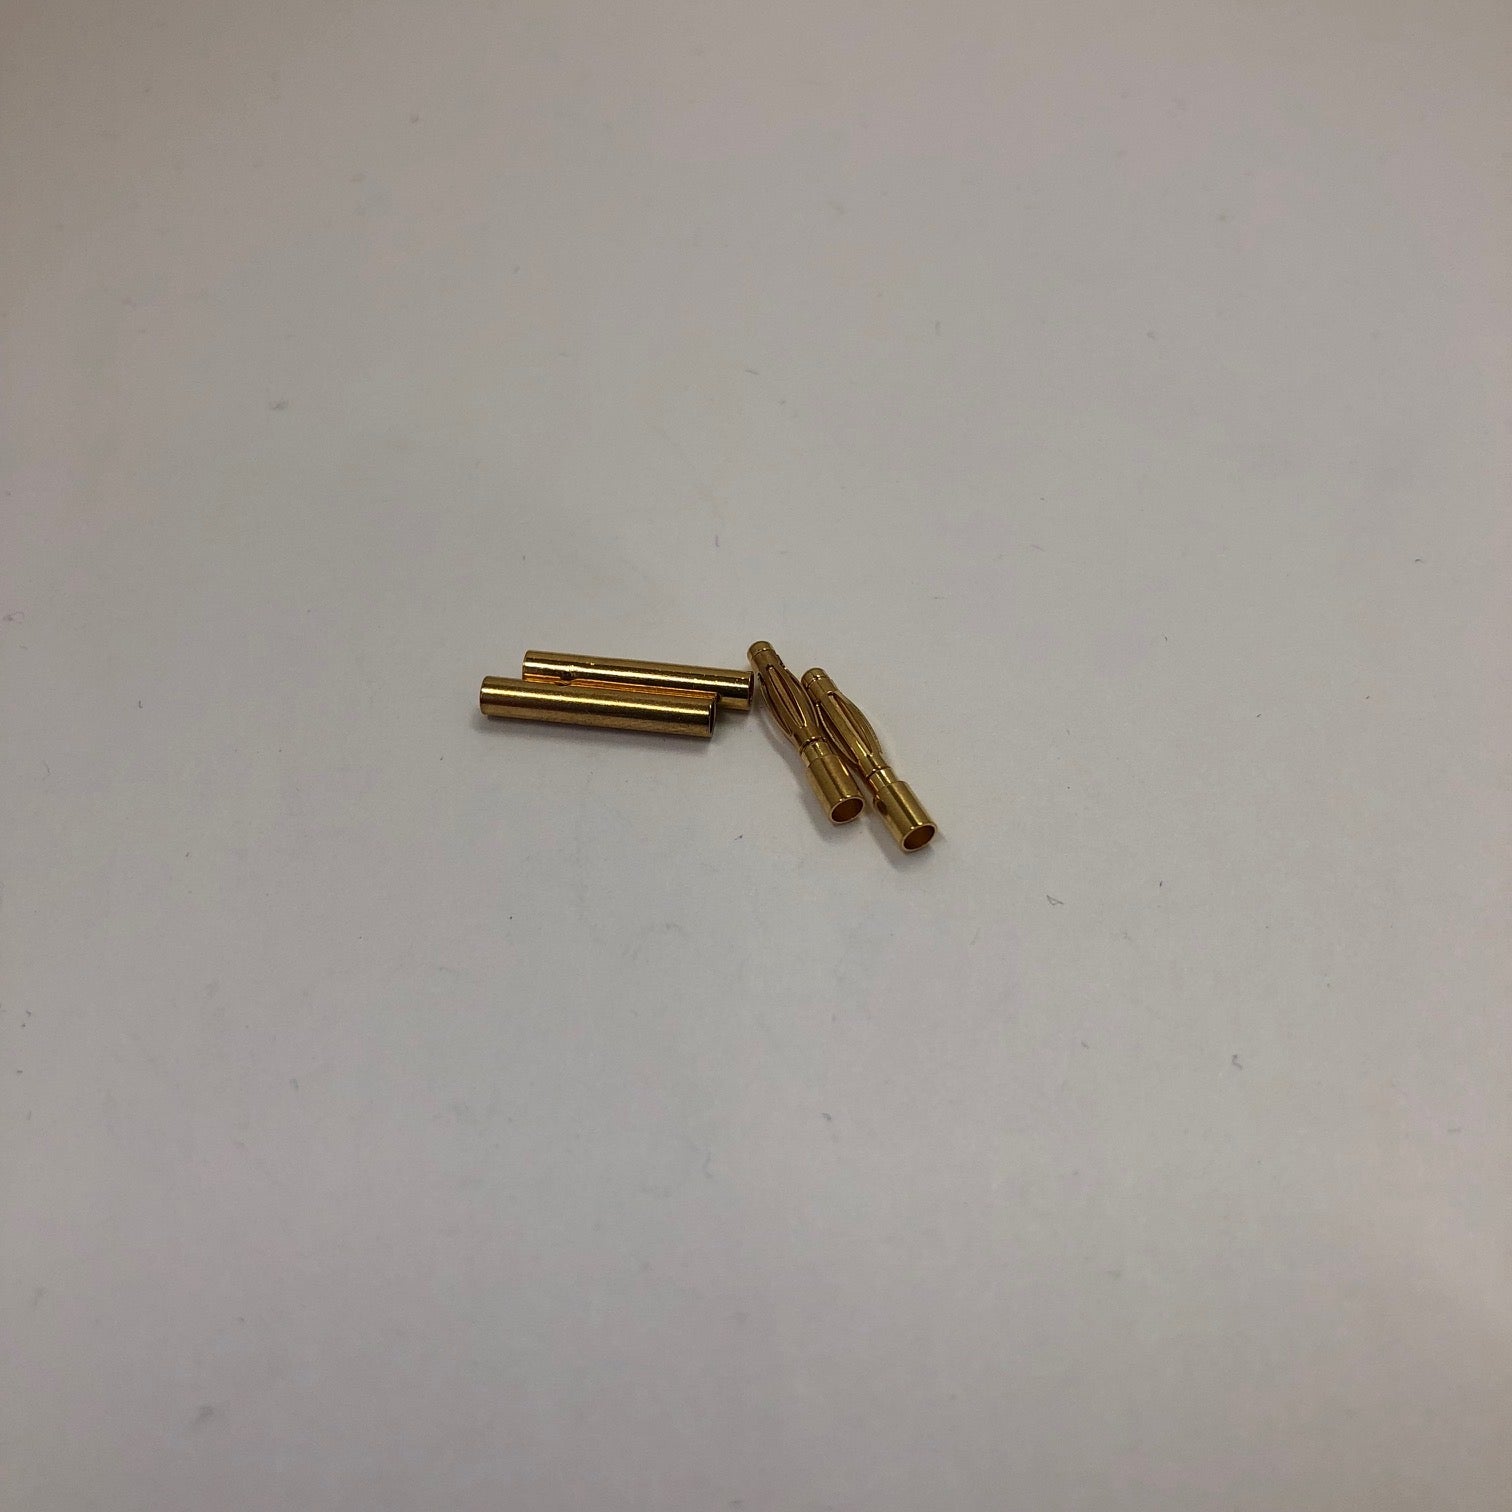 2mm Gold Bullet Connector Set - 2 Pairs